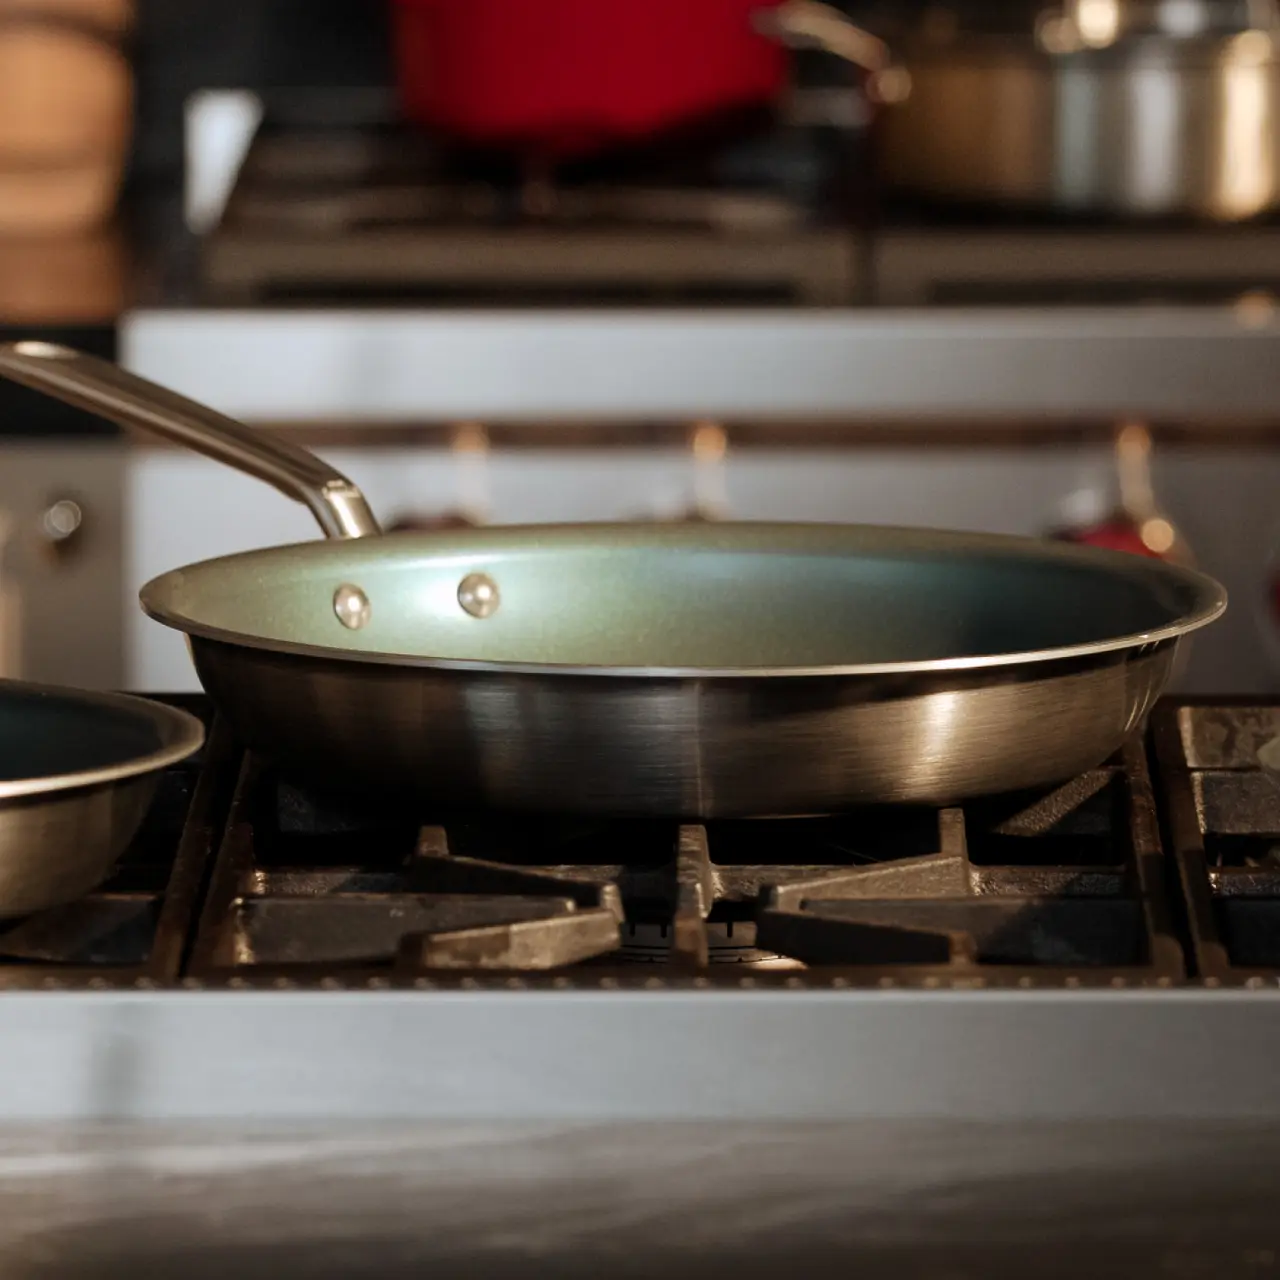 A frying pan sits on a gas stove-top, ready for cooking.